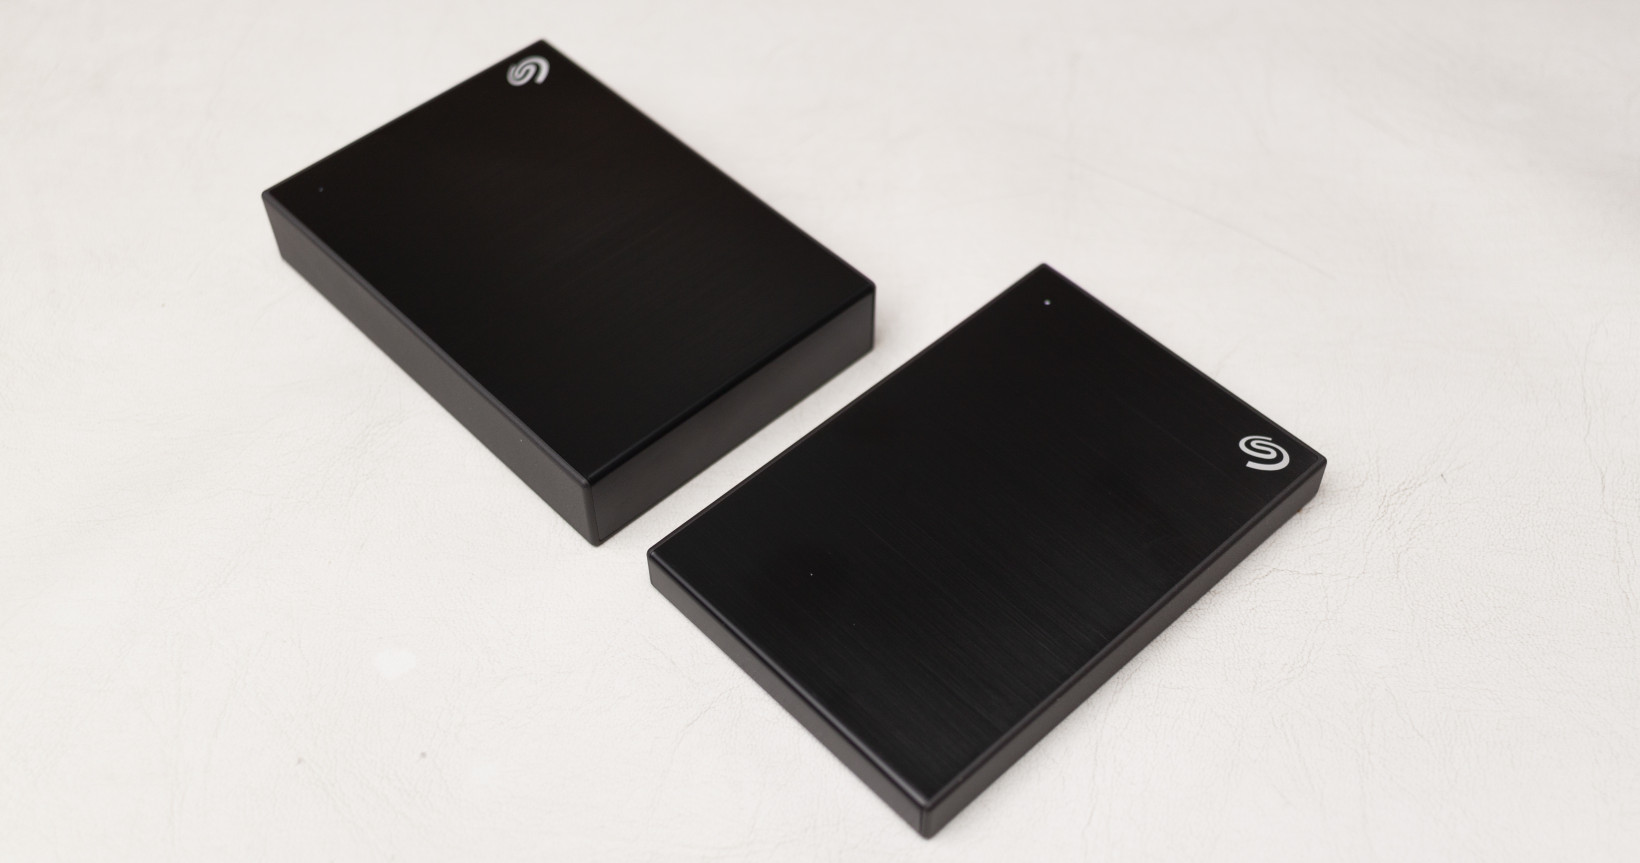 The 5TB model (left) is unfortunately far slower with write speeds than the slim 2TB model (right)